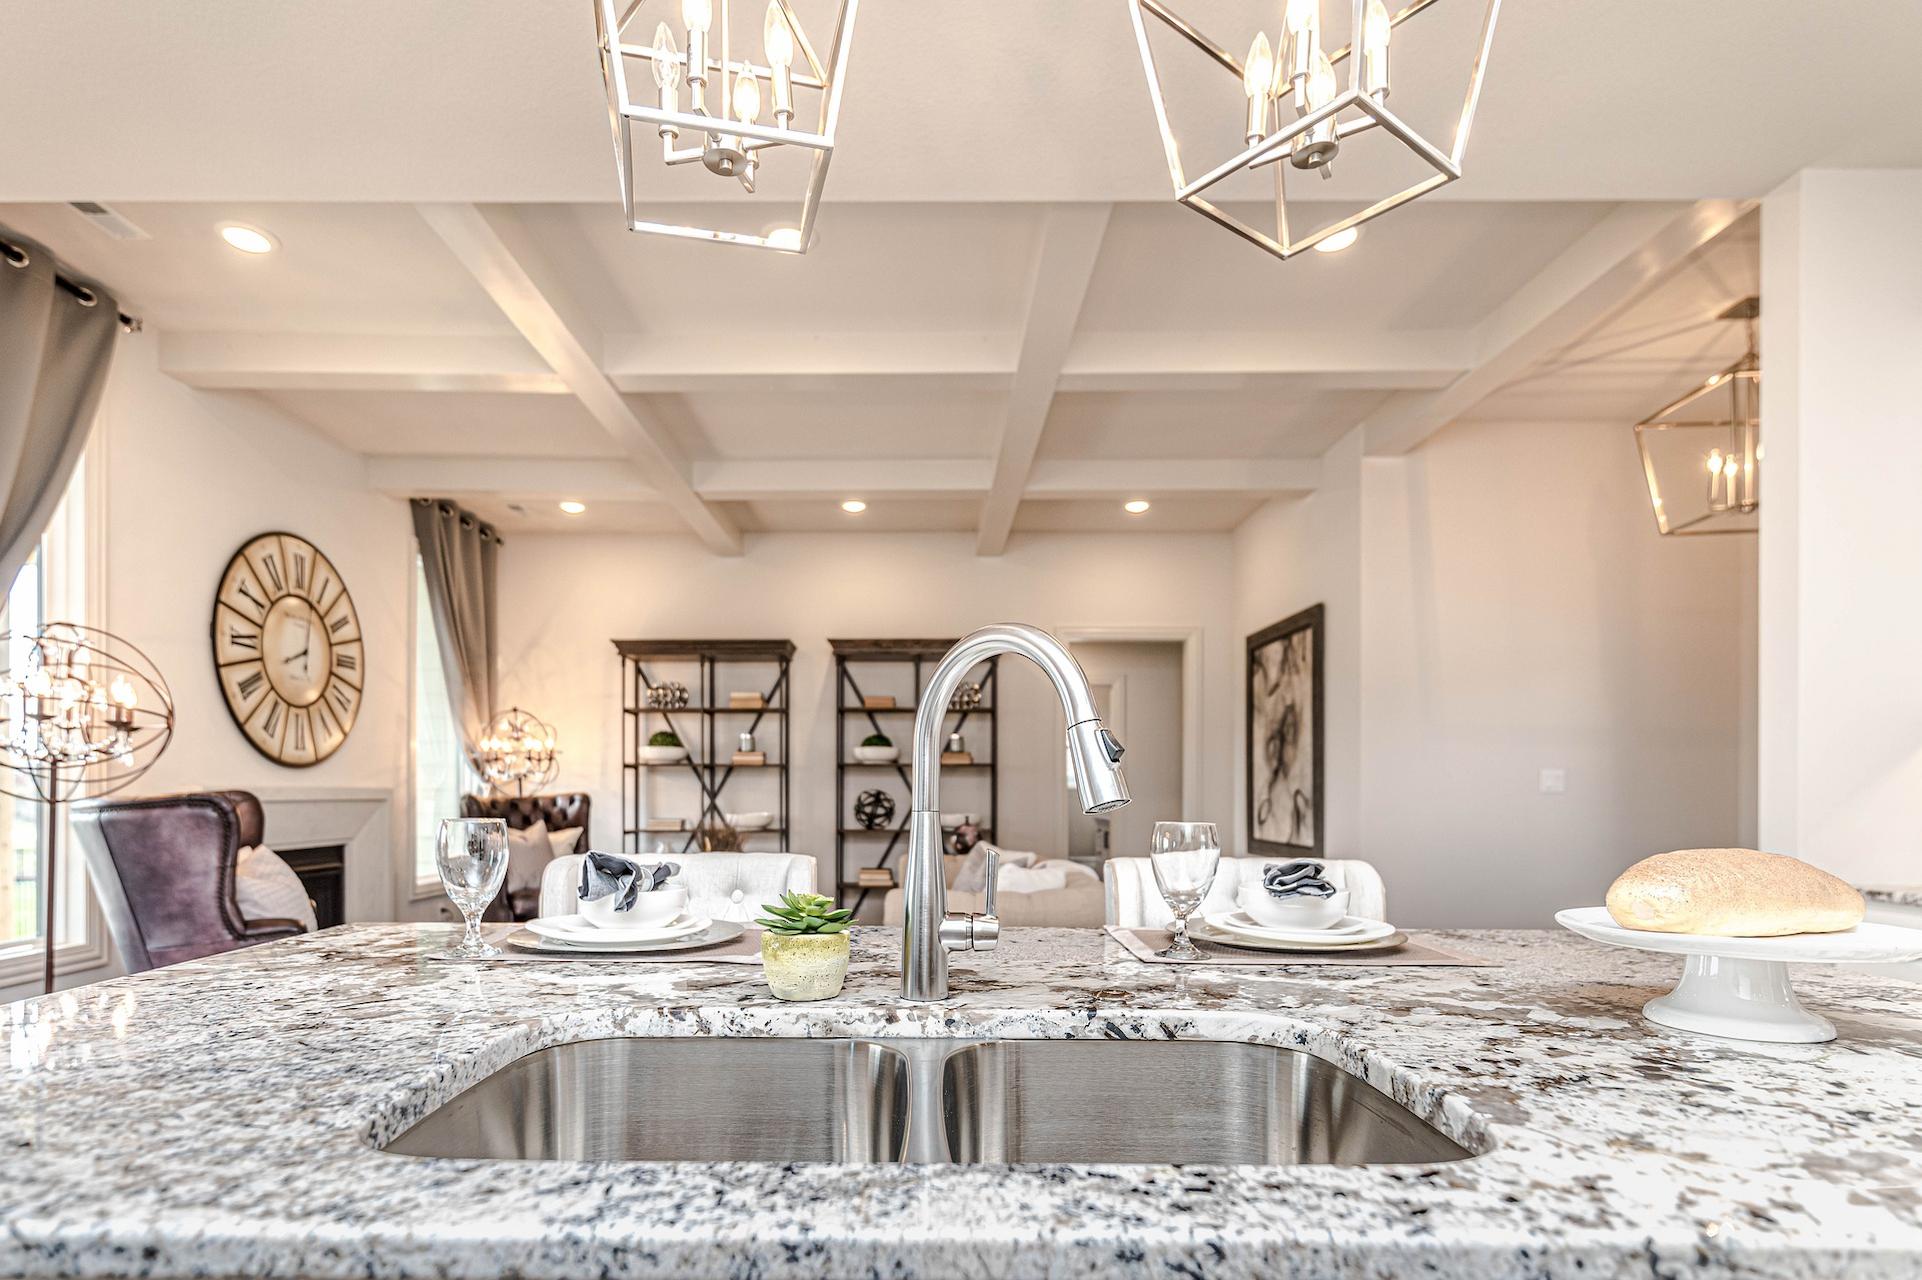 Benefits Of Having A Quartz Countertop In Your House